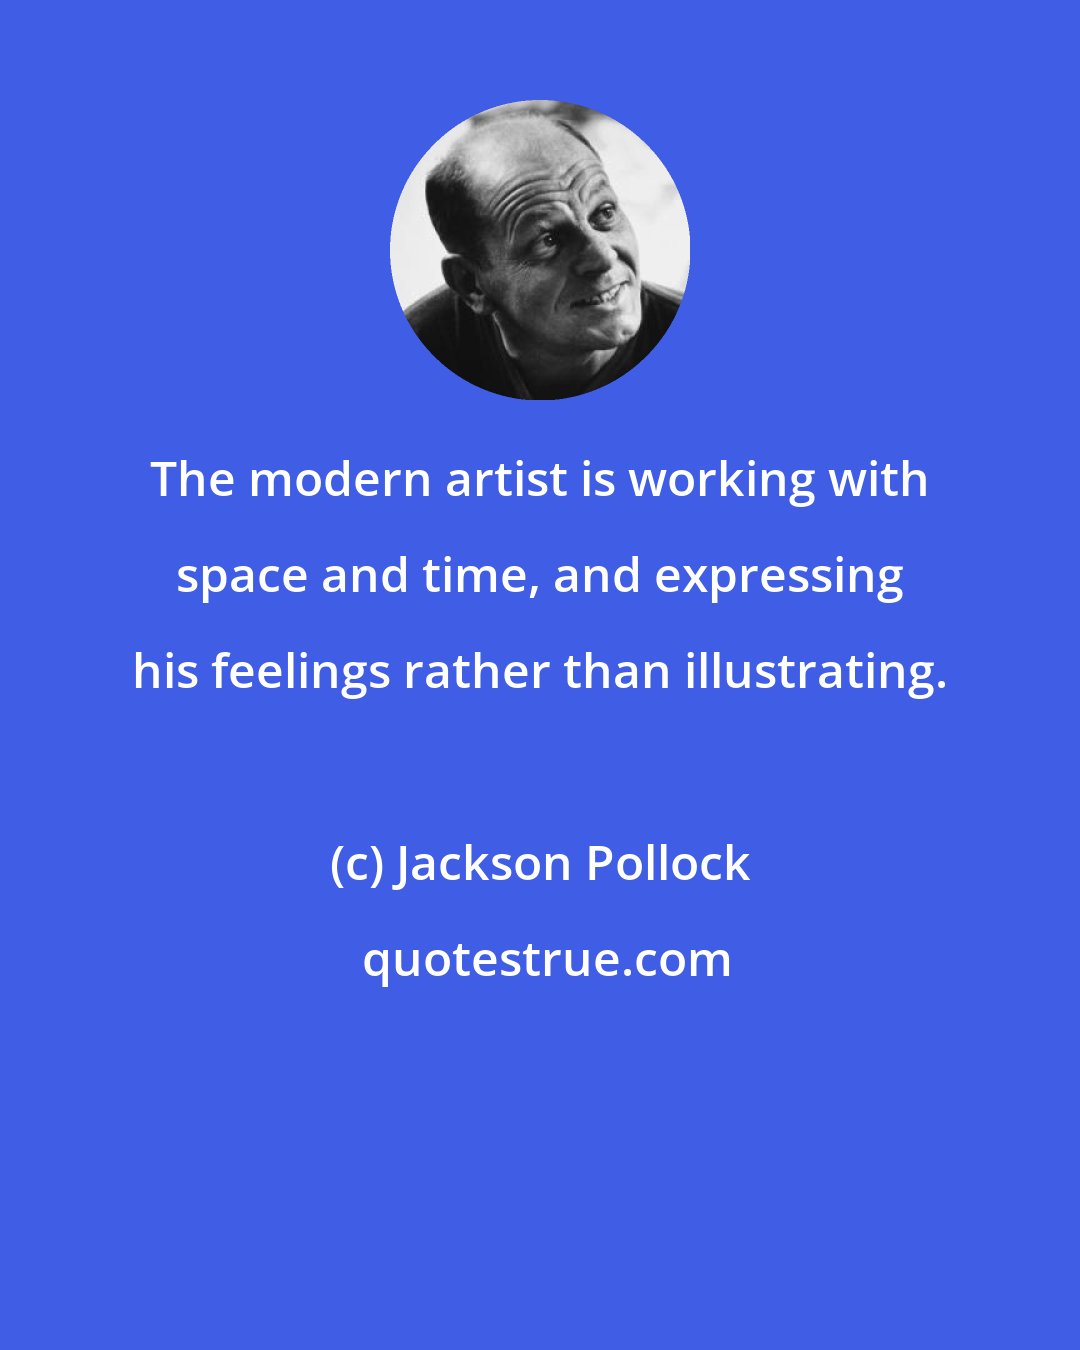 Jackson Pollock: The modern artist is working with space and time, and expressing his feelings rather than illustrating.